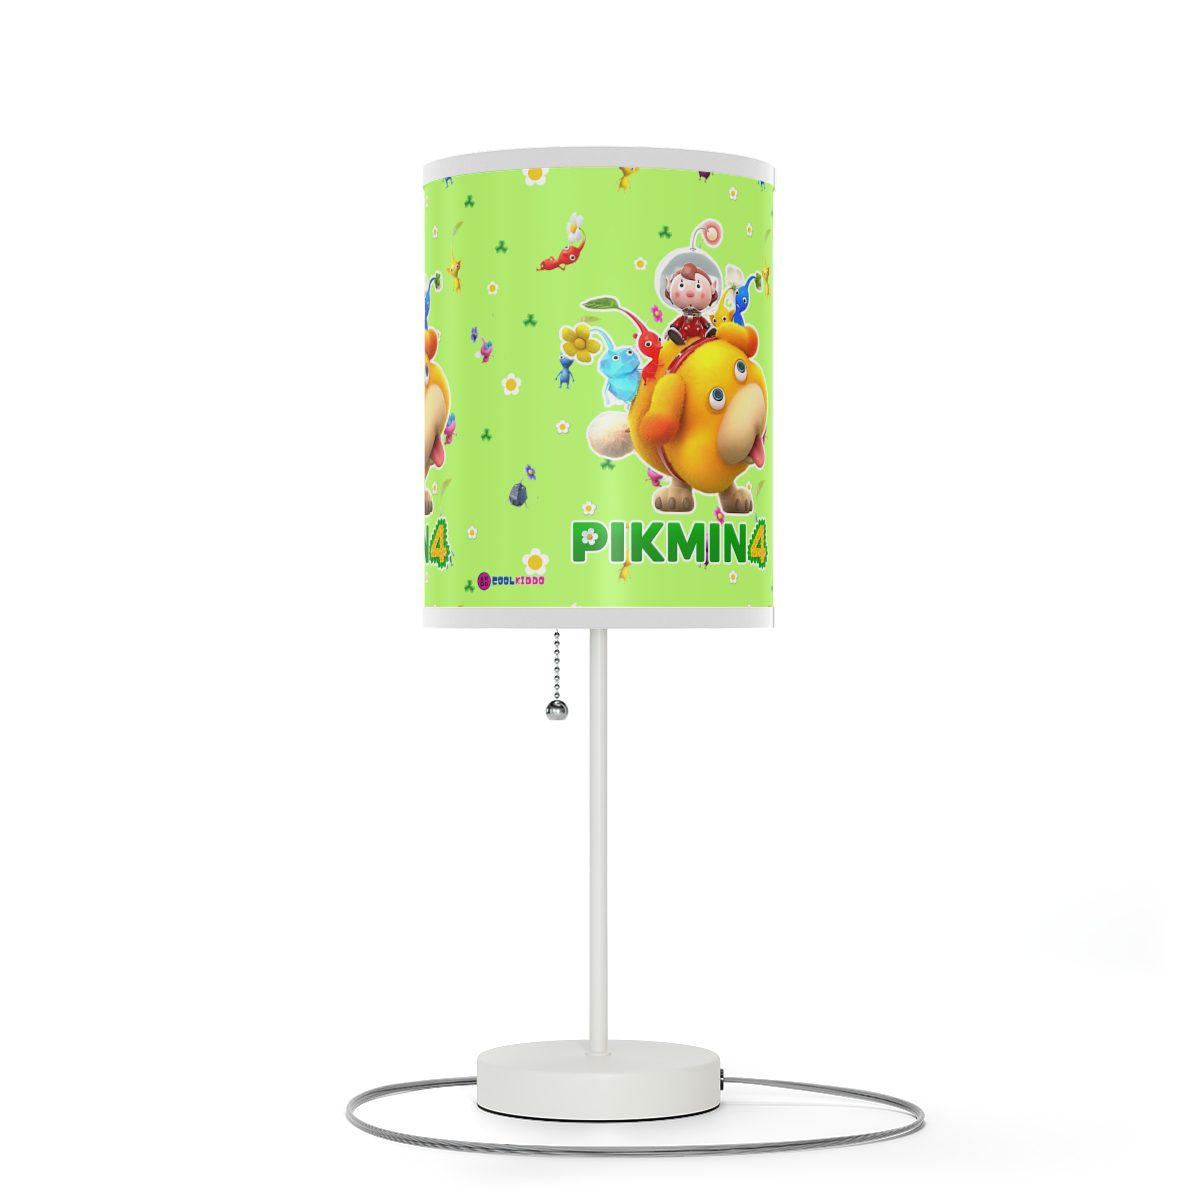 Pikmin 4 videogame Green Lamp on a Stand Cool Kiddo 16